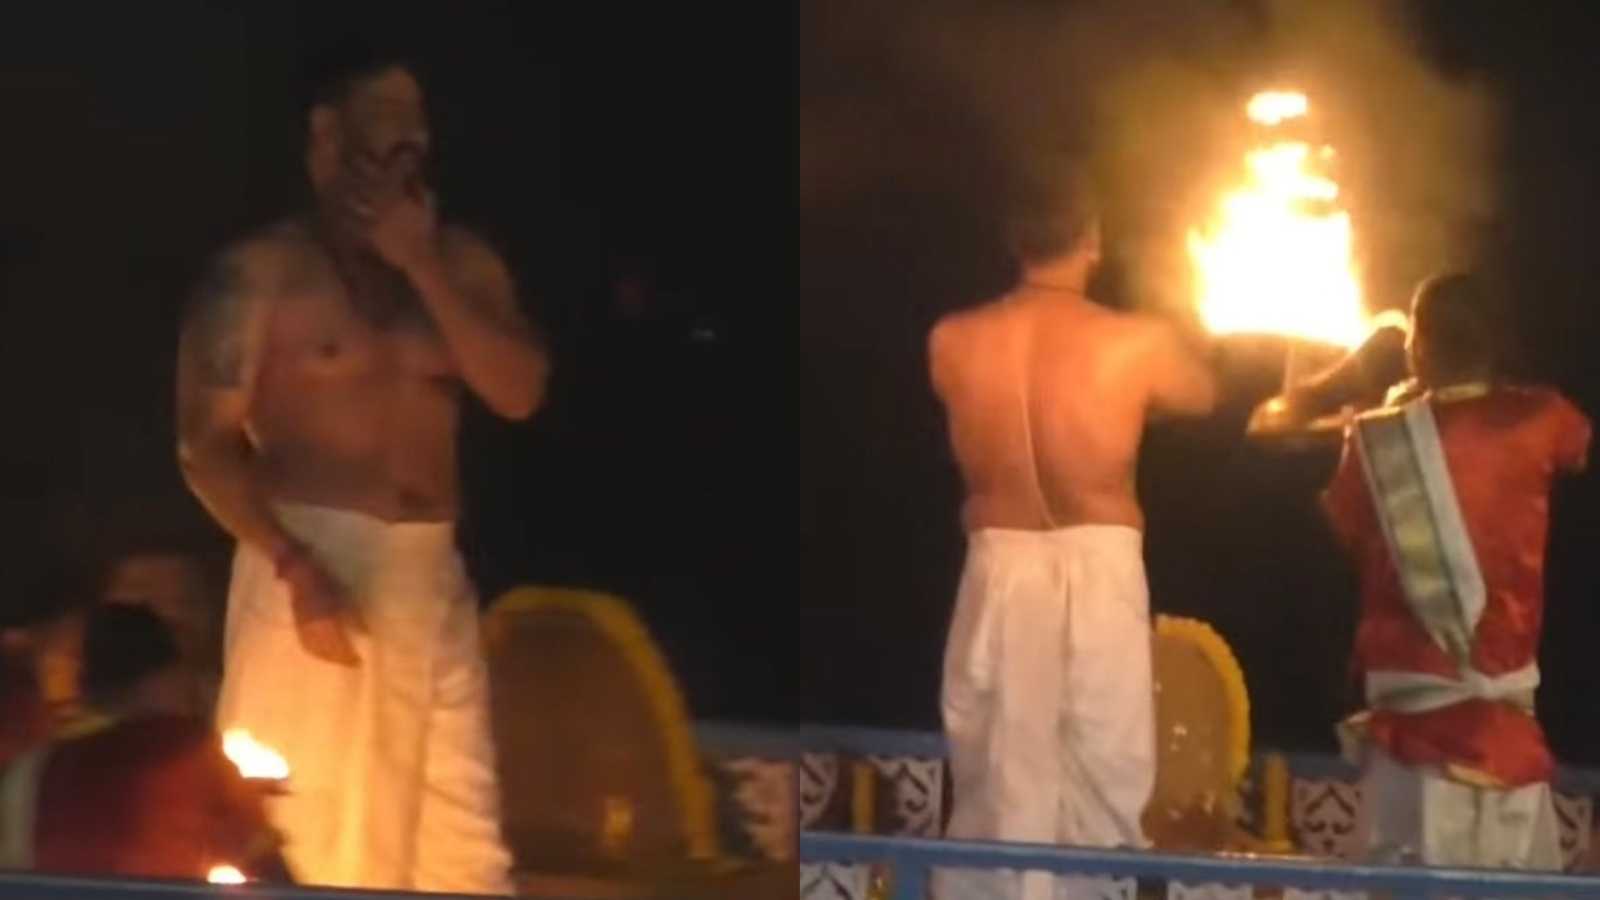 Ajay Devgn shoots shirtless for Bholaa at Ganga ghat on a cold winter evening in Varanasi, fans predict it will be his next 200 crore film